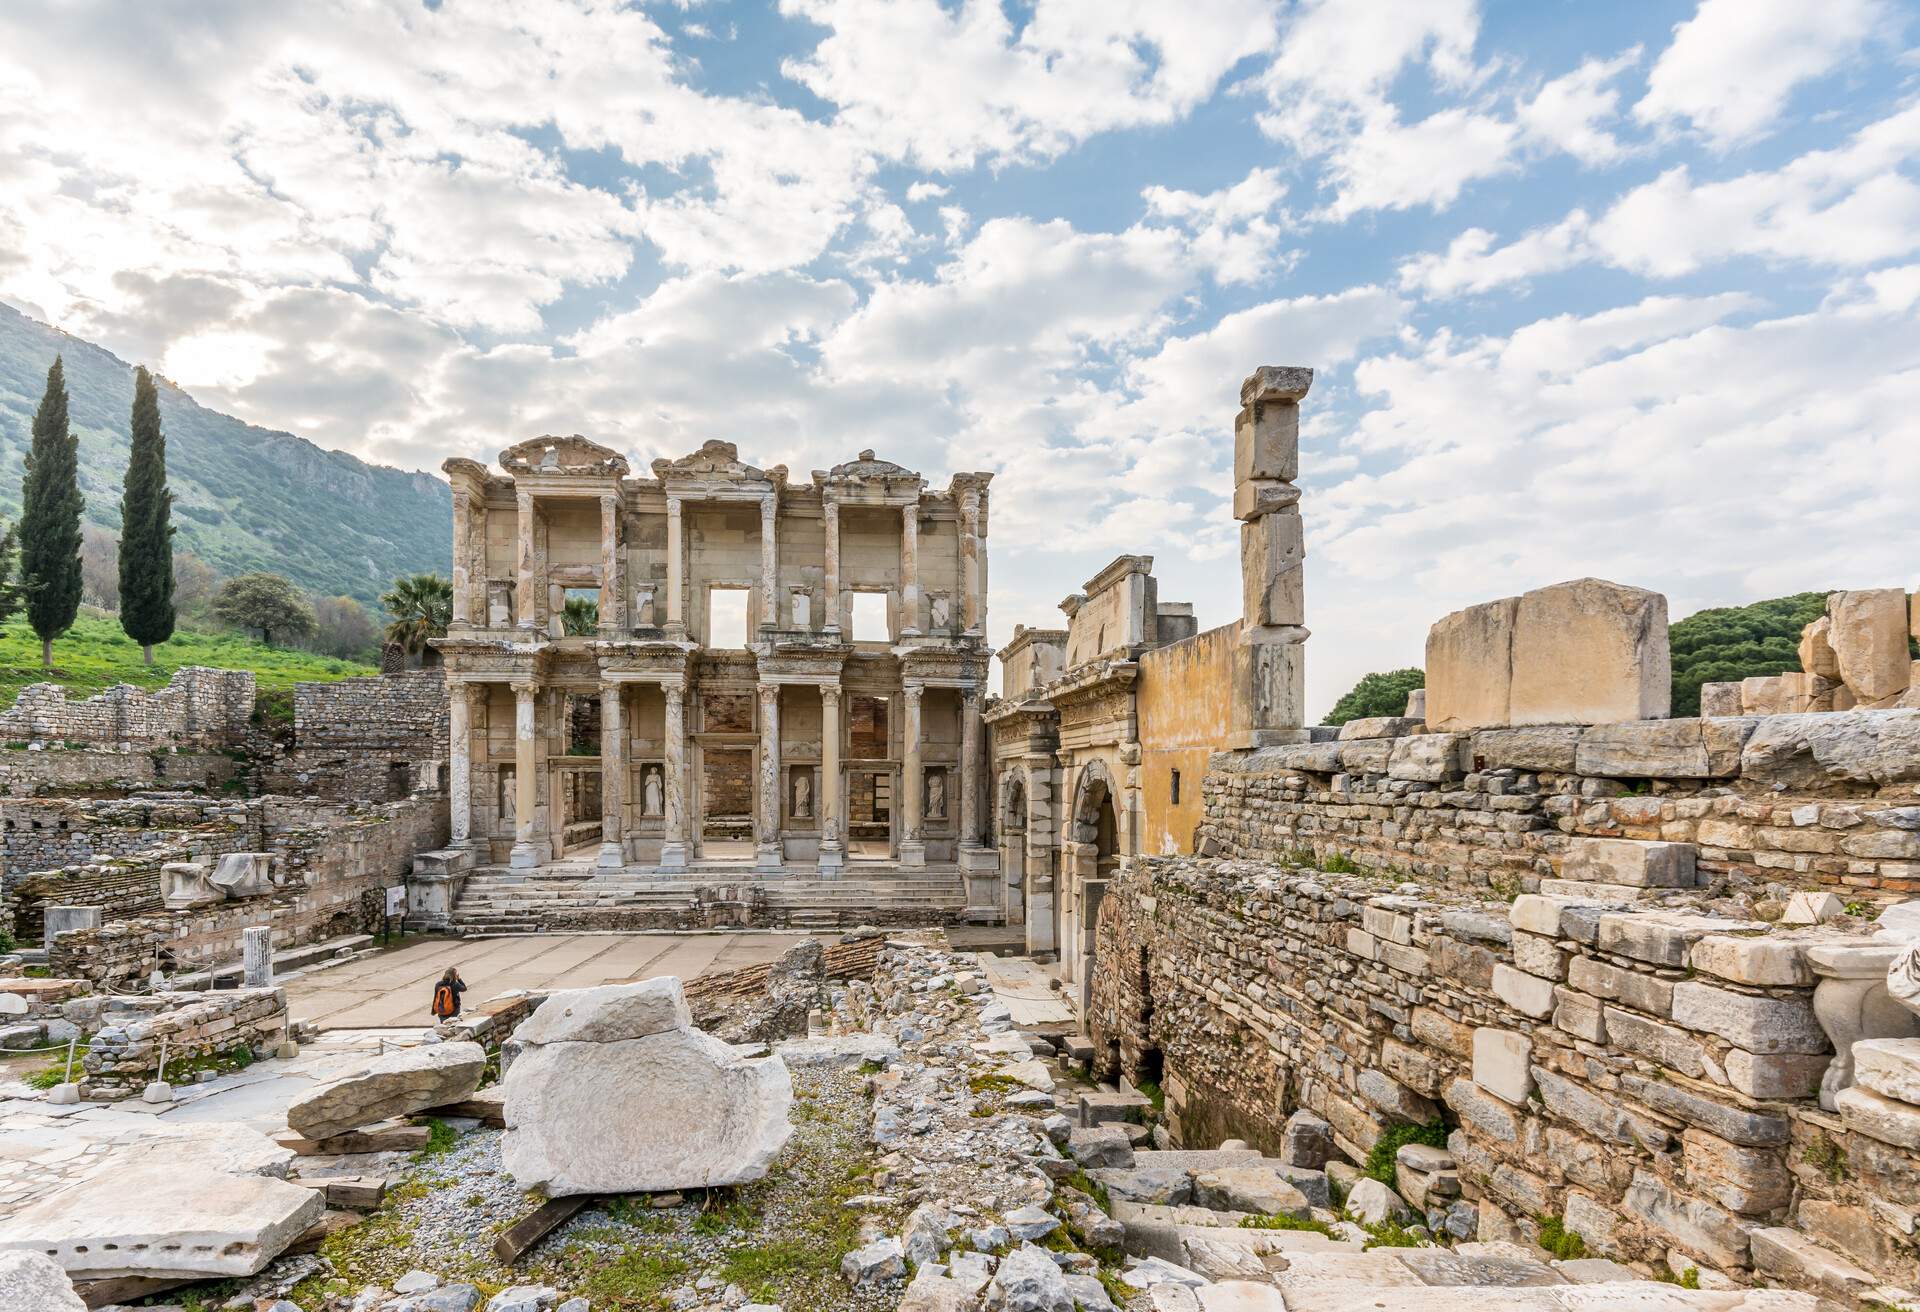 This library is one of the most beautiful structures in Ephesus.